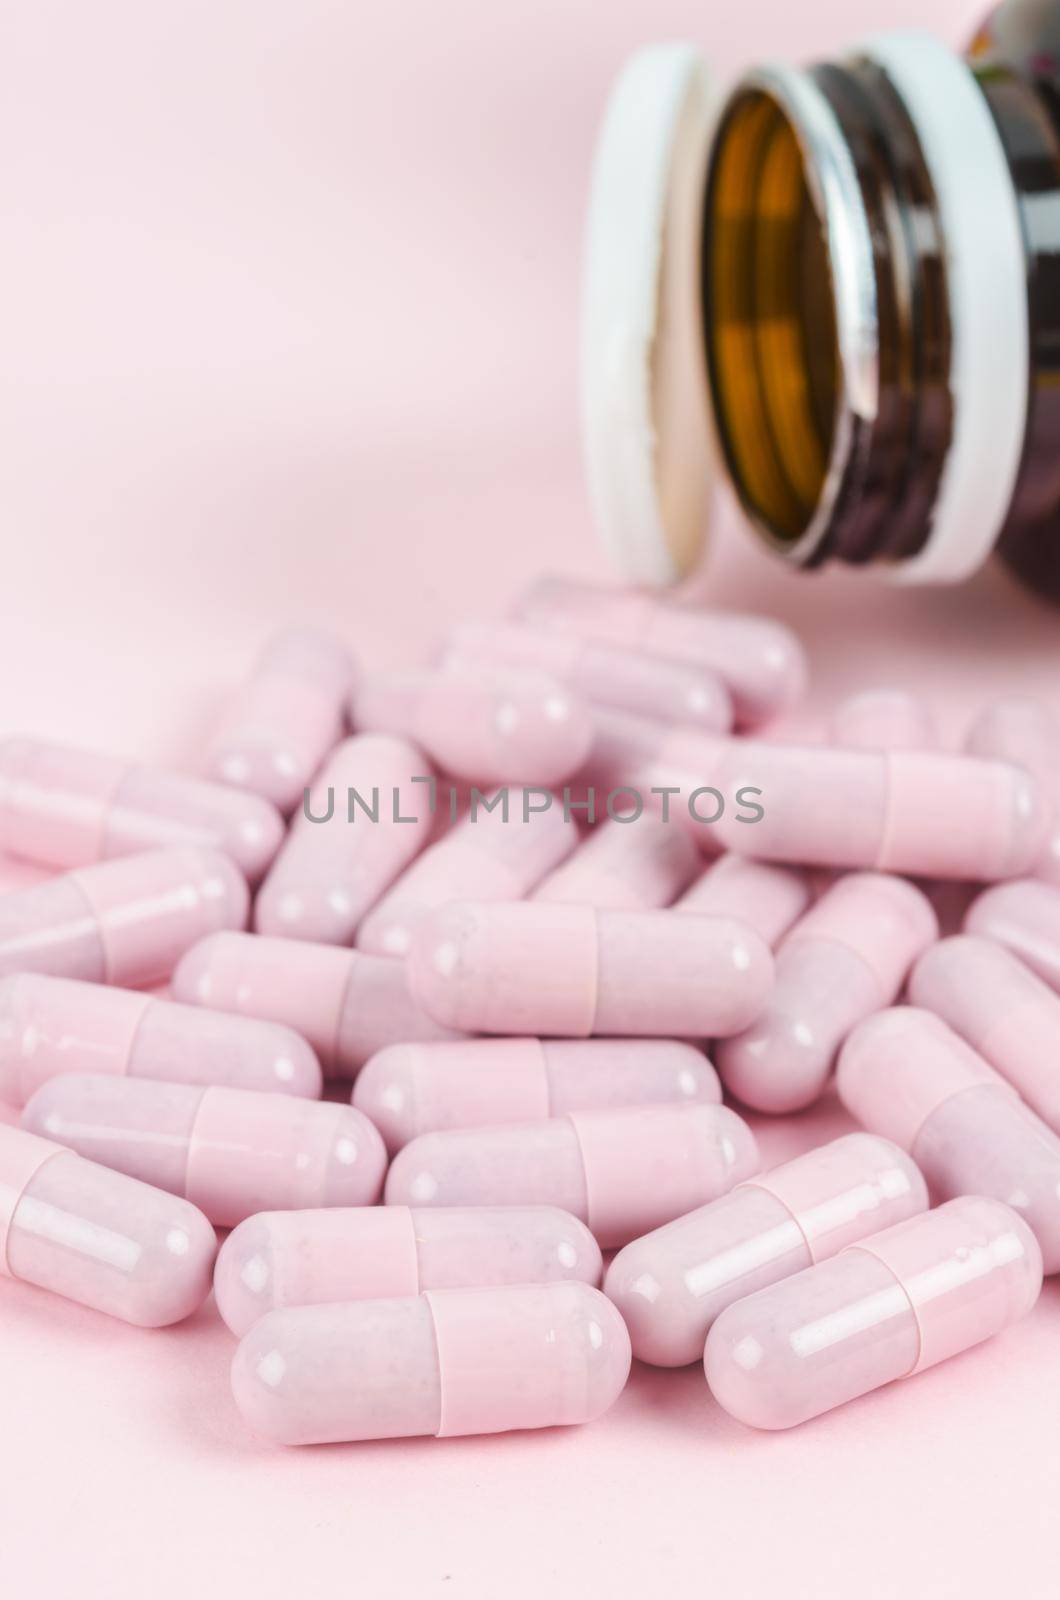 Pink capsule pills with bottle on pink background by Gamjai